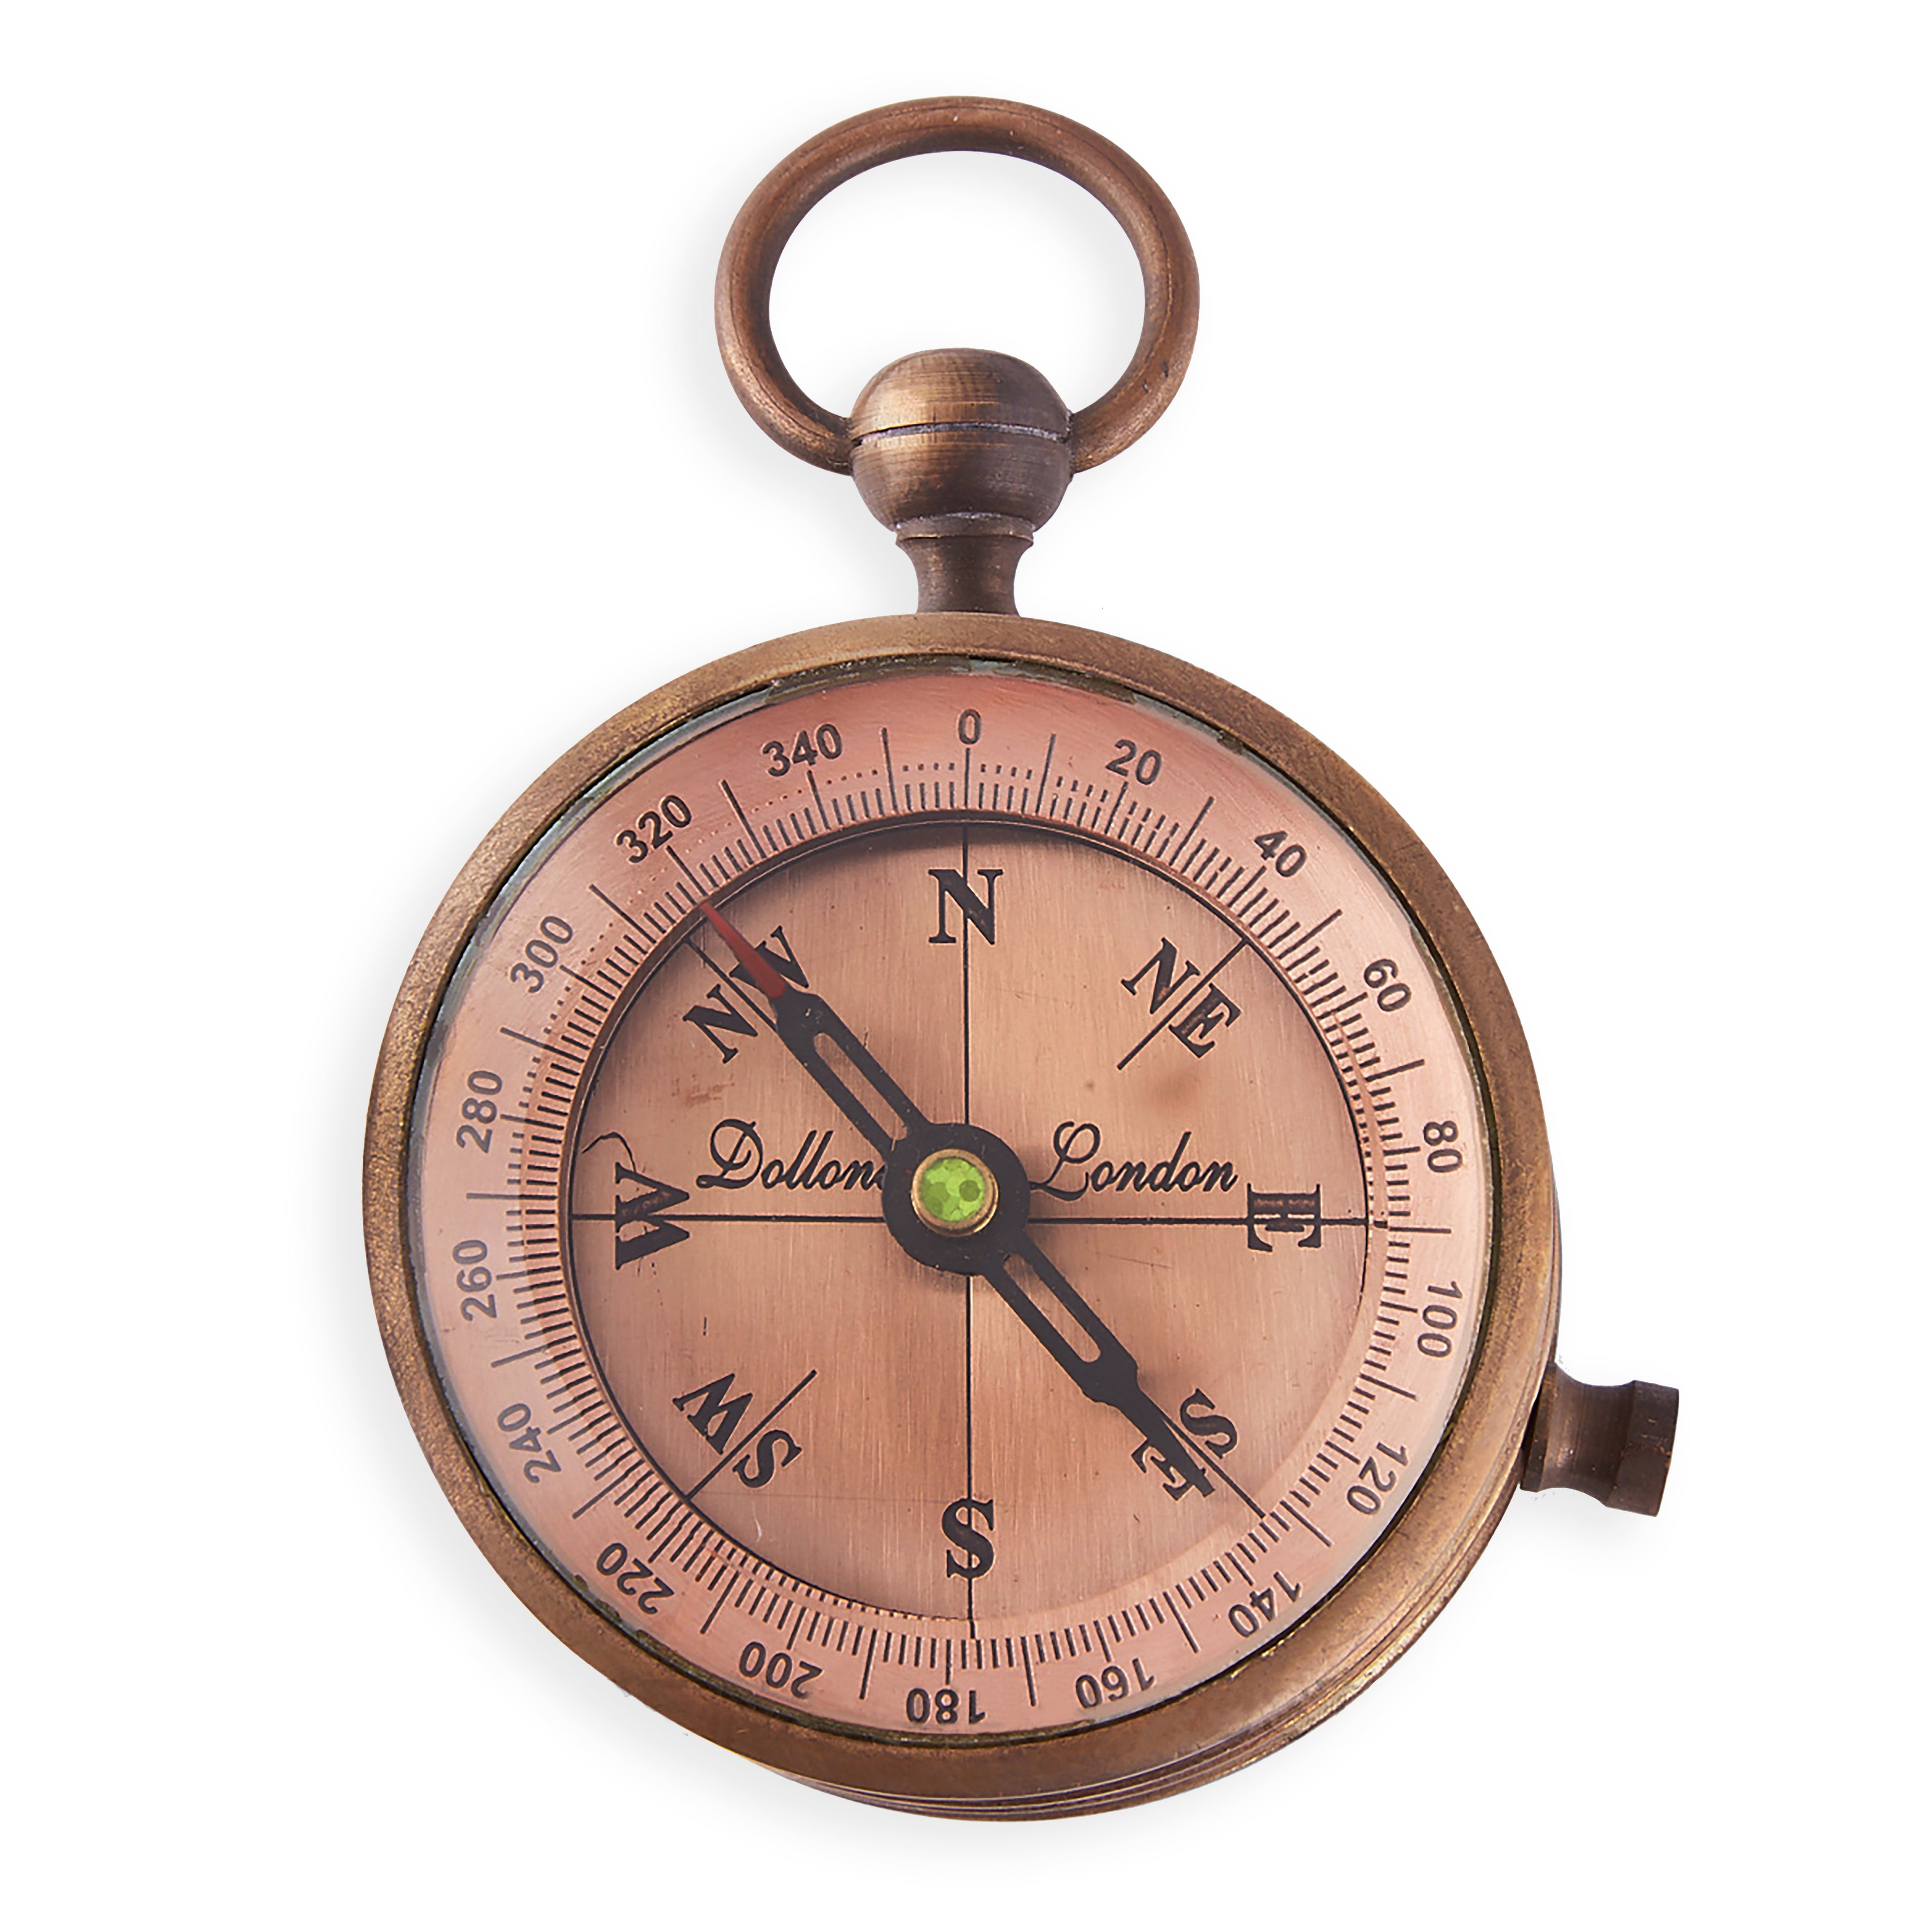 Dollond Copper Dial Compass